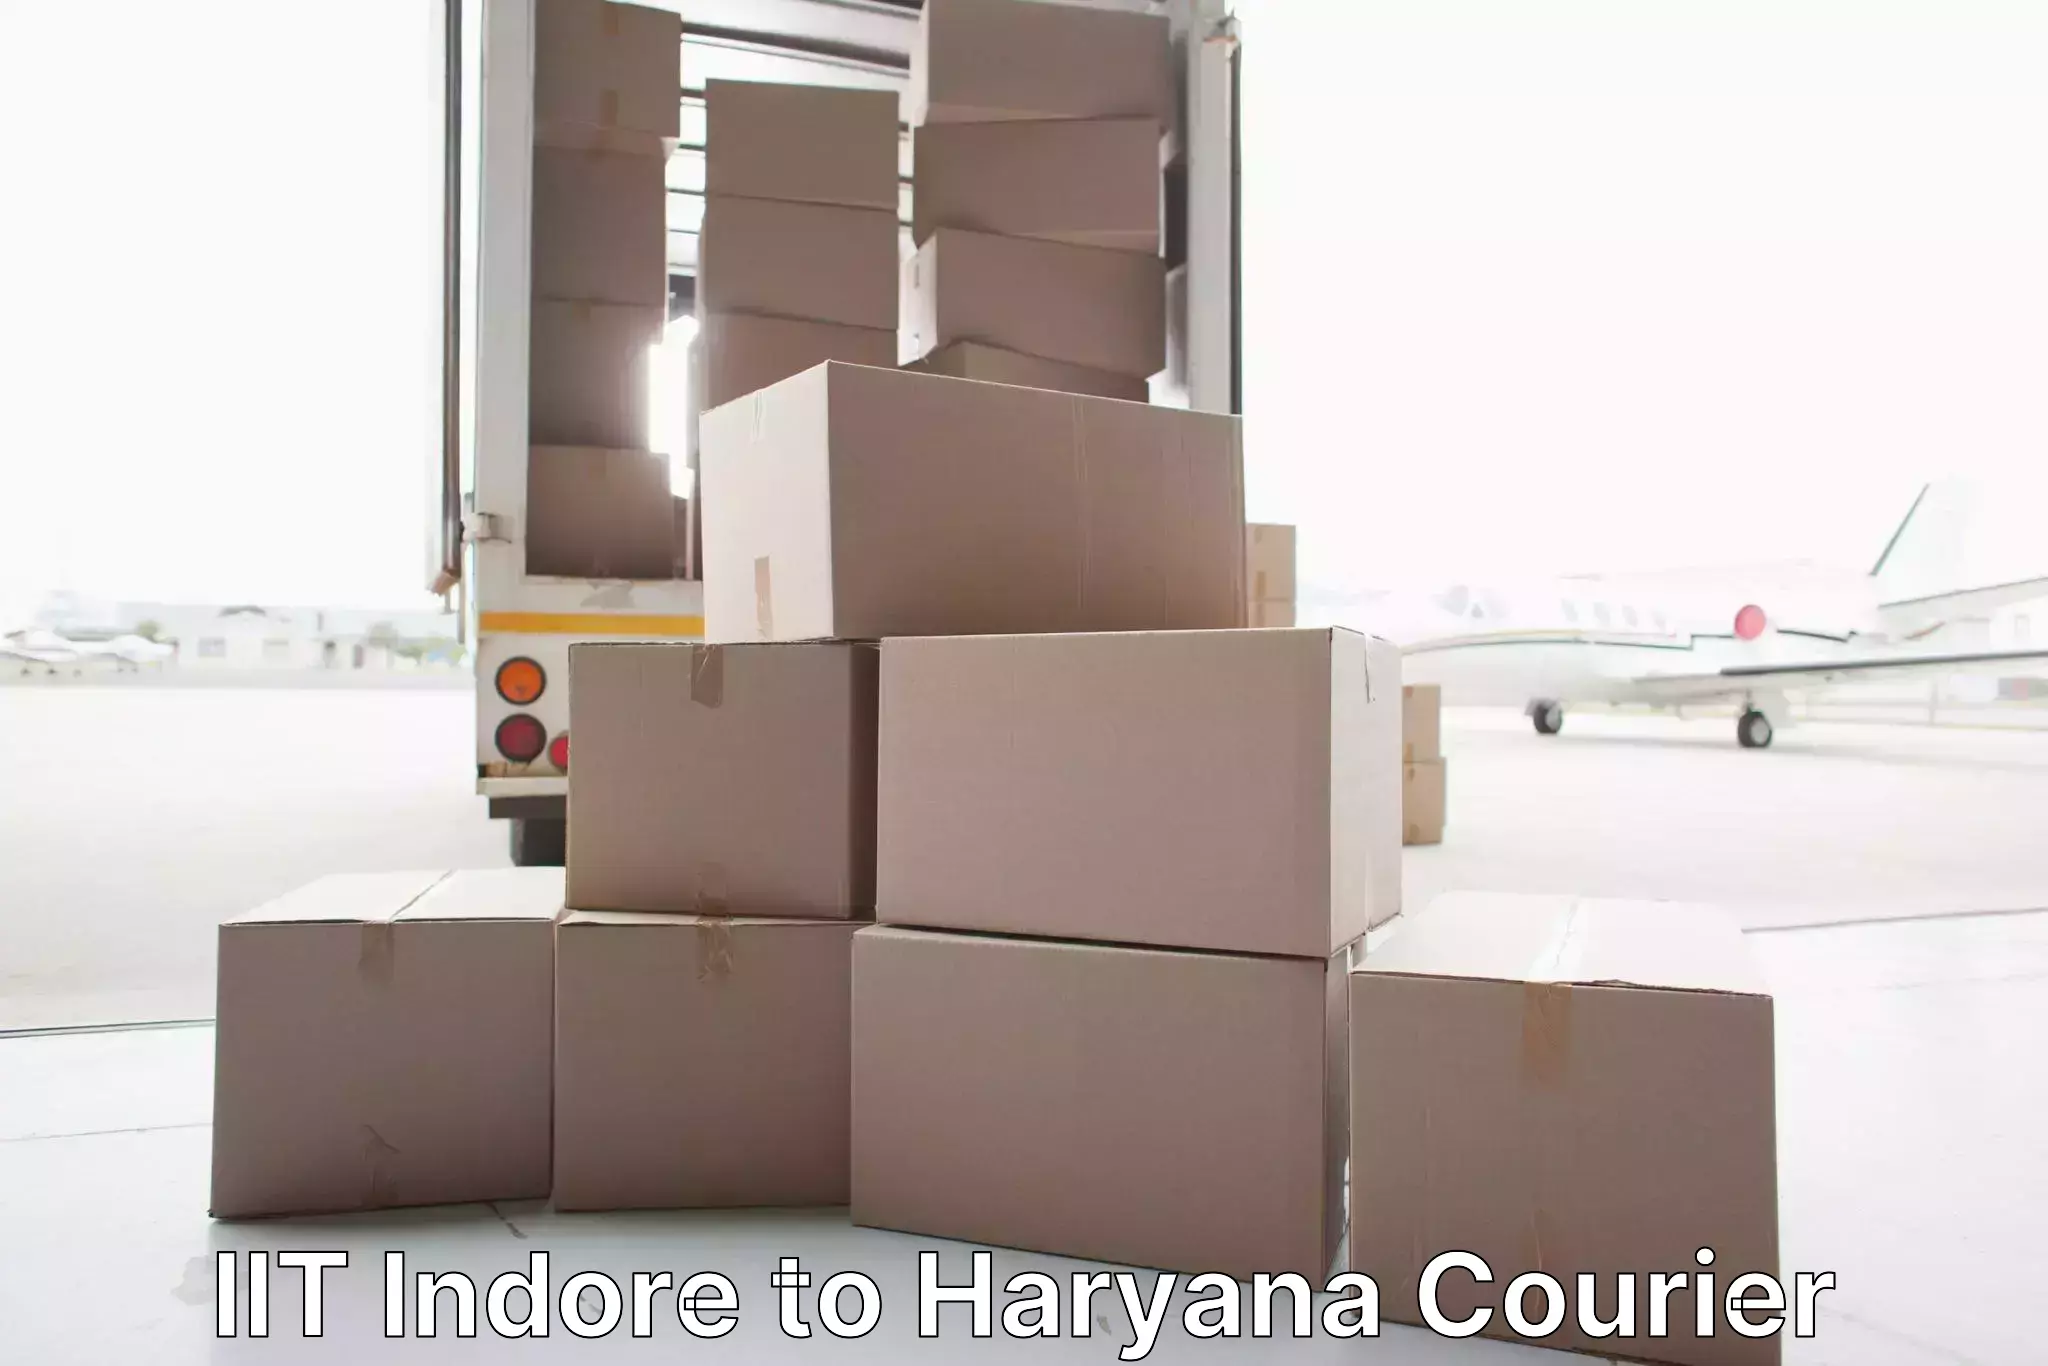 Furniture transport experts IIT Indore to Haryana